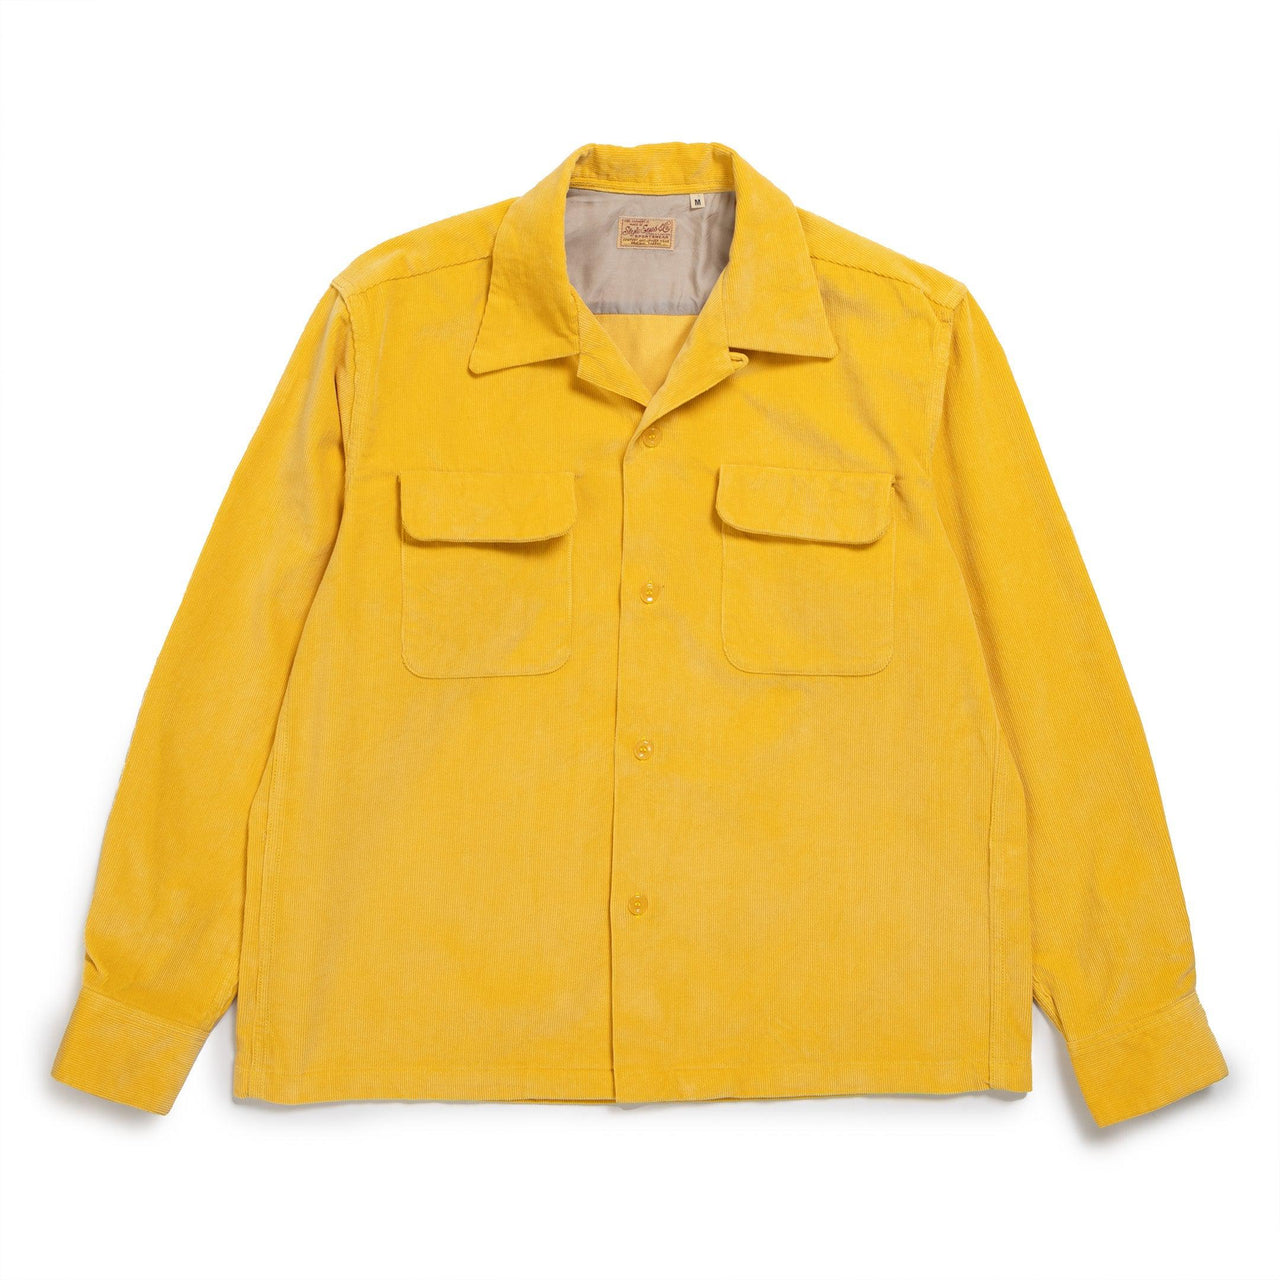 Style Eyes Solid Model Corduroy Sports Shirt Yellow-Shirt-Clutch Cafe